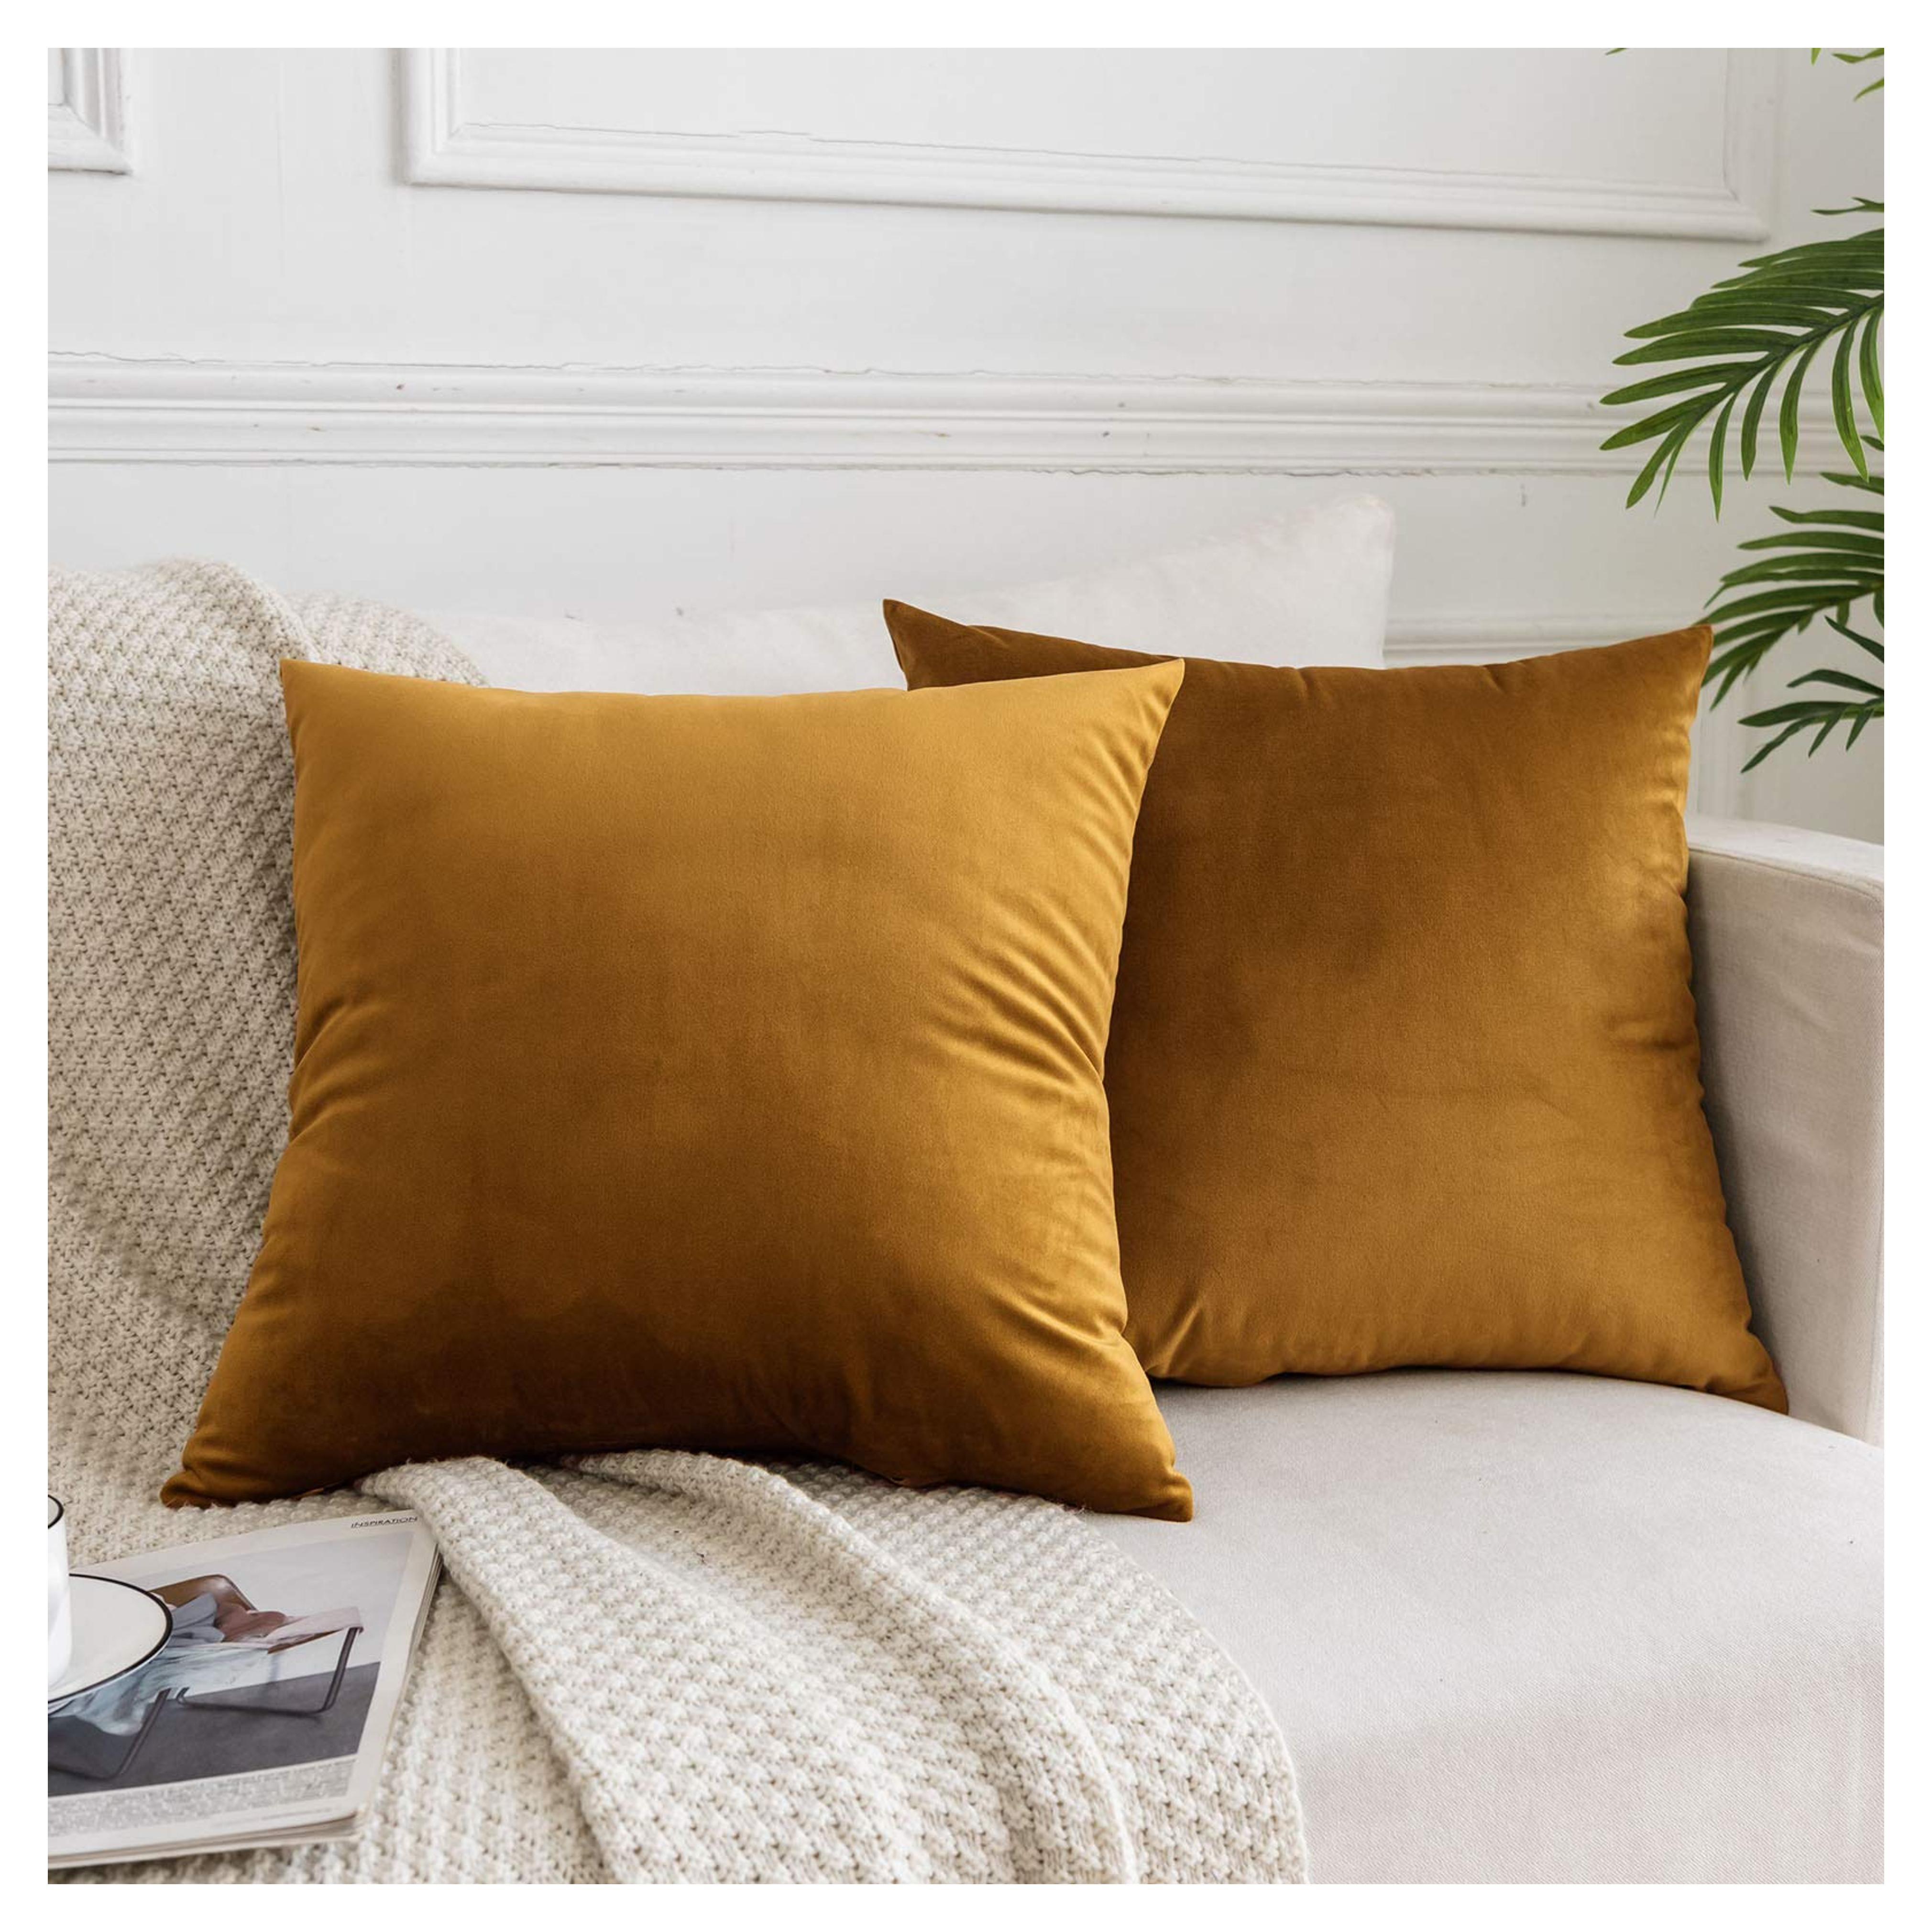 Amazon.com: JUSPURBET Mustard Yellow Velvet Throw Pillow Covers 18x18 Set of 2 for Sofa Couch Bed,Decorative Soft Solid Cushion Cases : Home & Kitchen